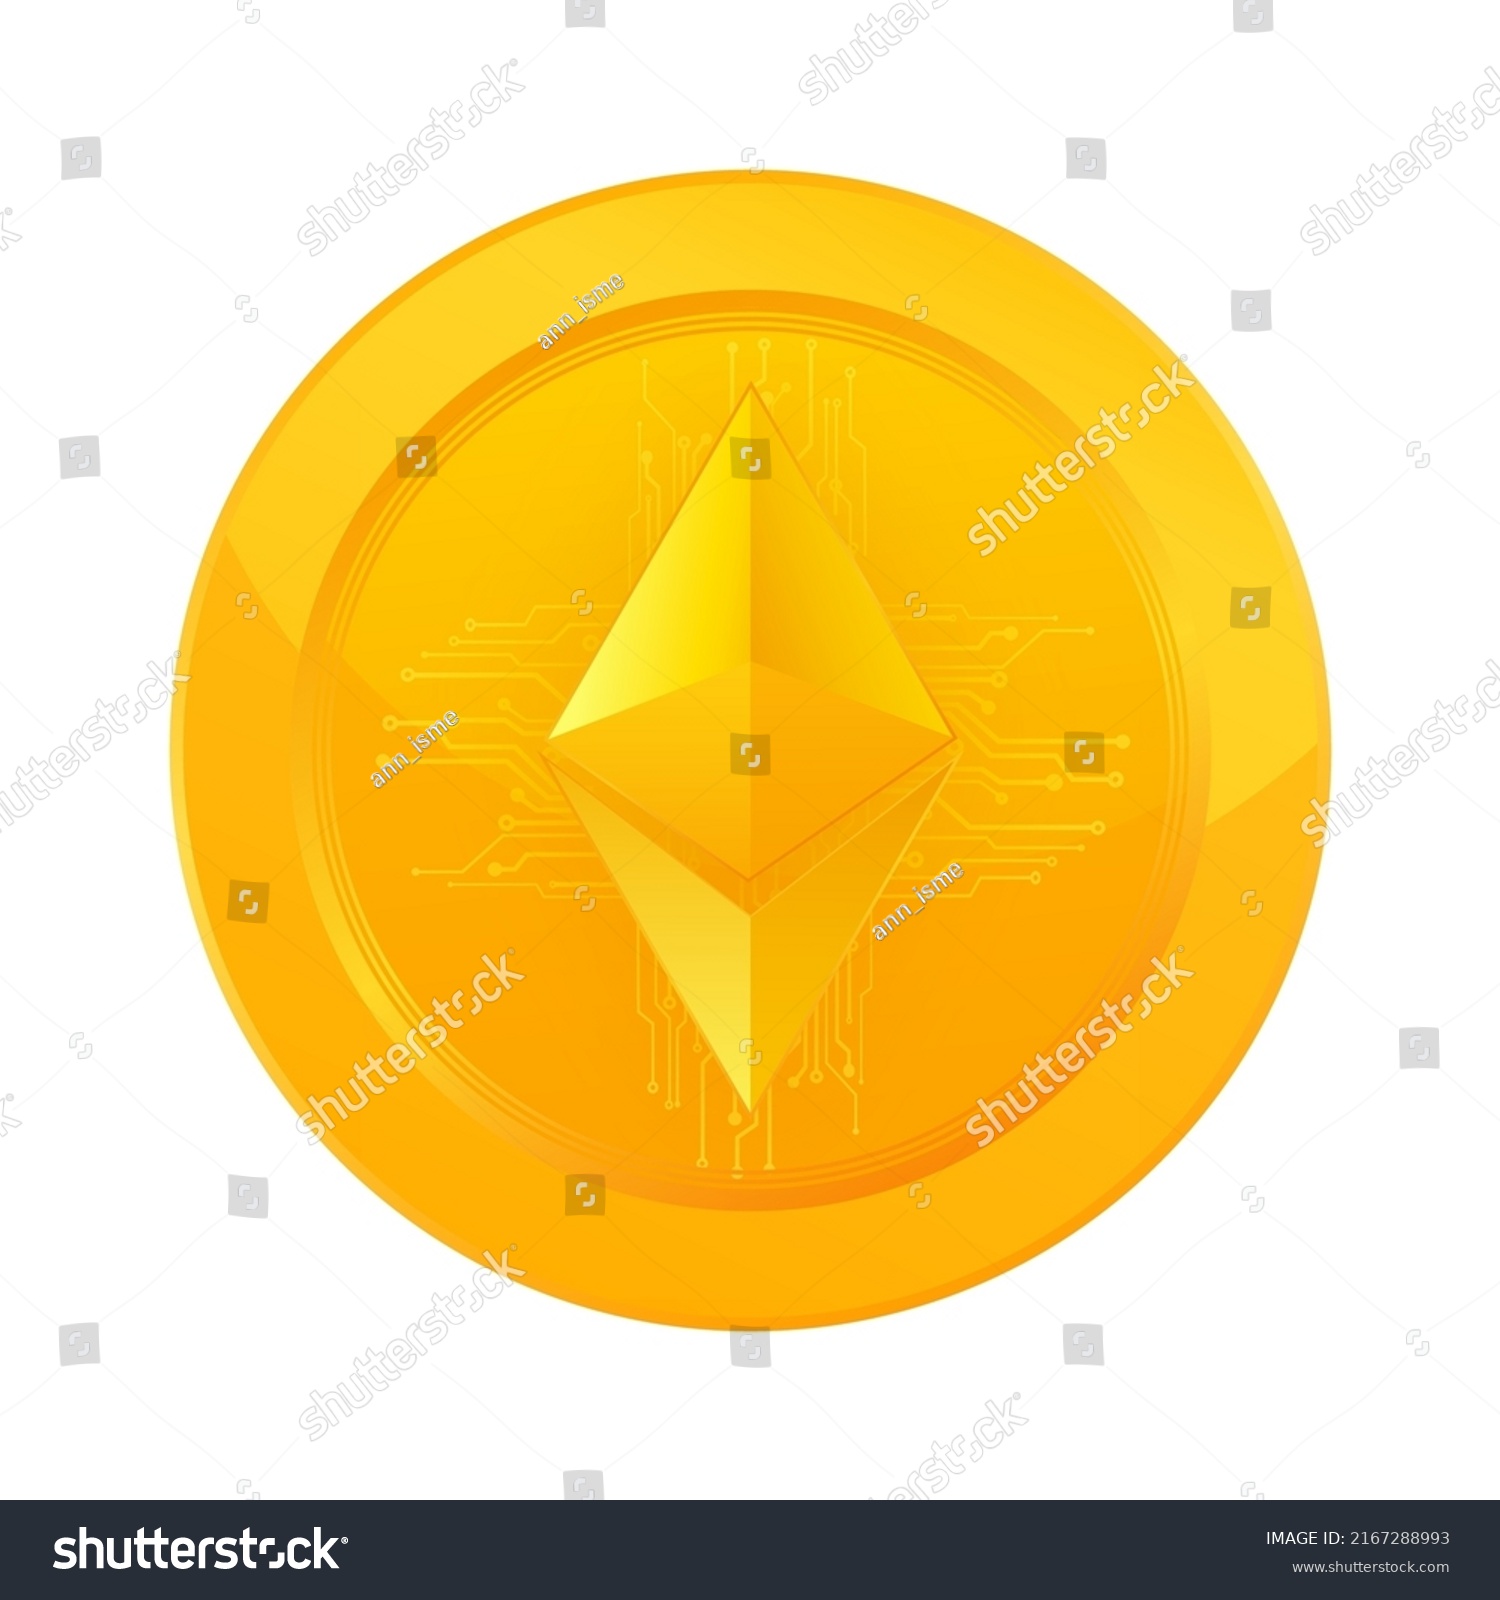 SVG of Ethereum coin, great design for any purposes. Crypto currency, crypto currency coin svg